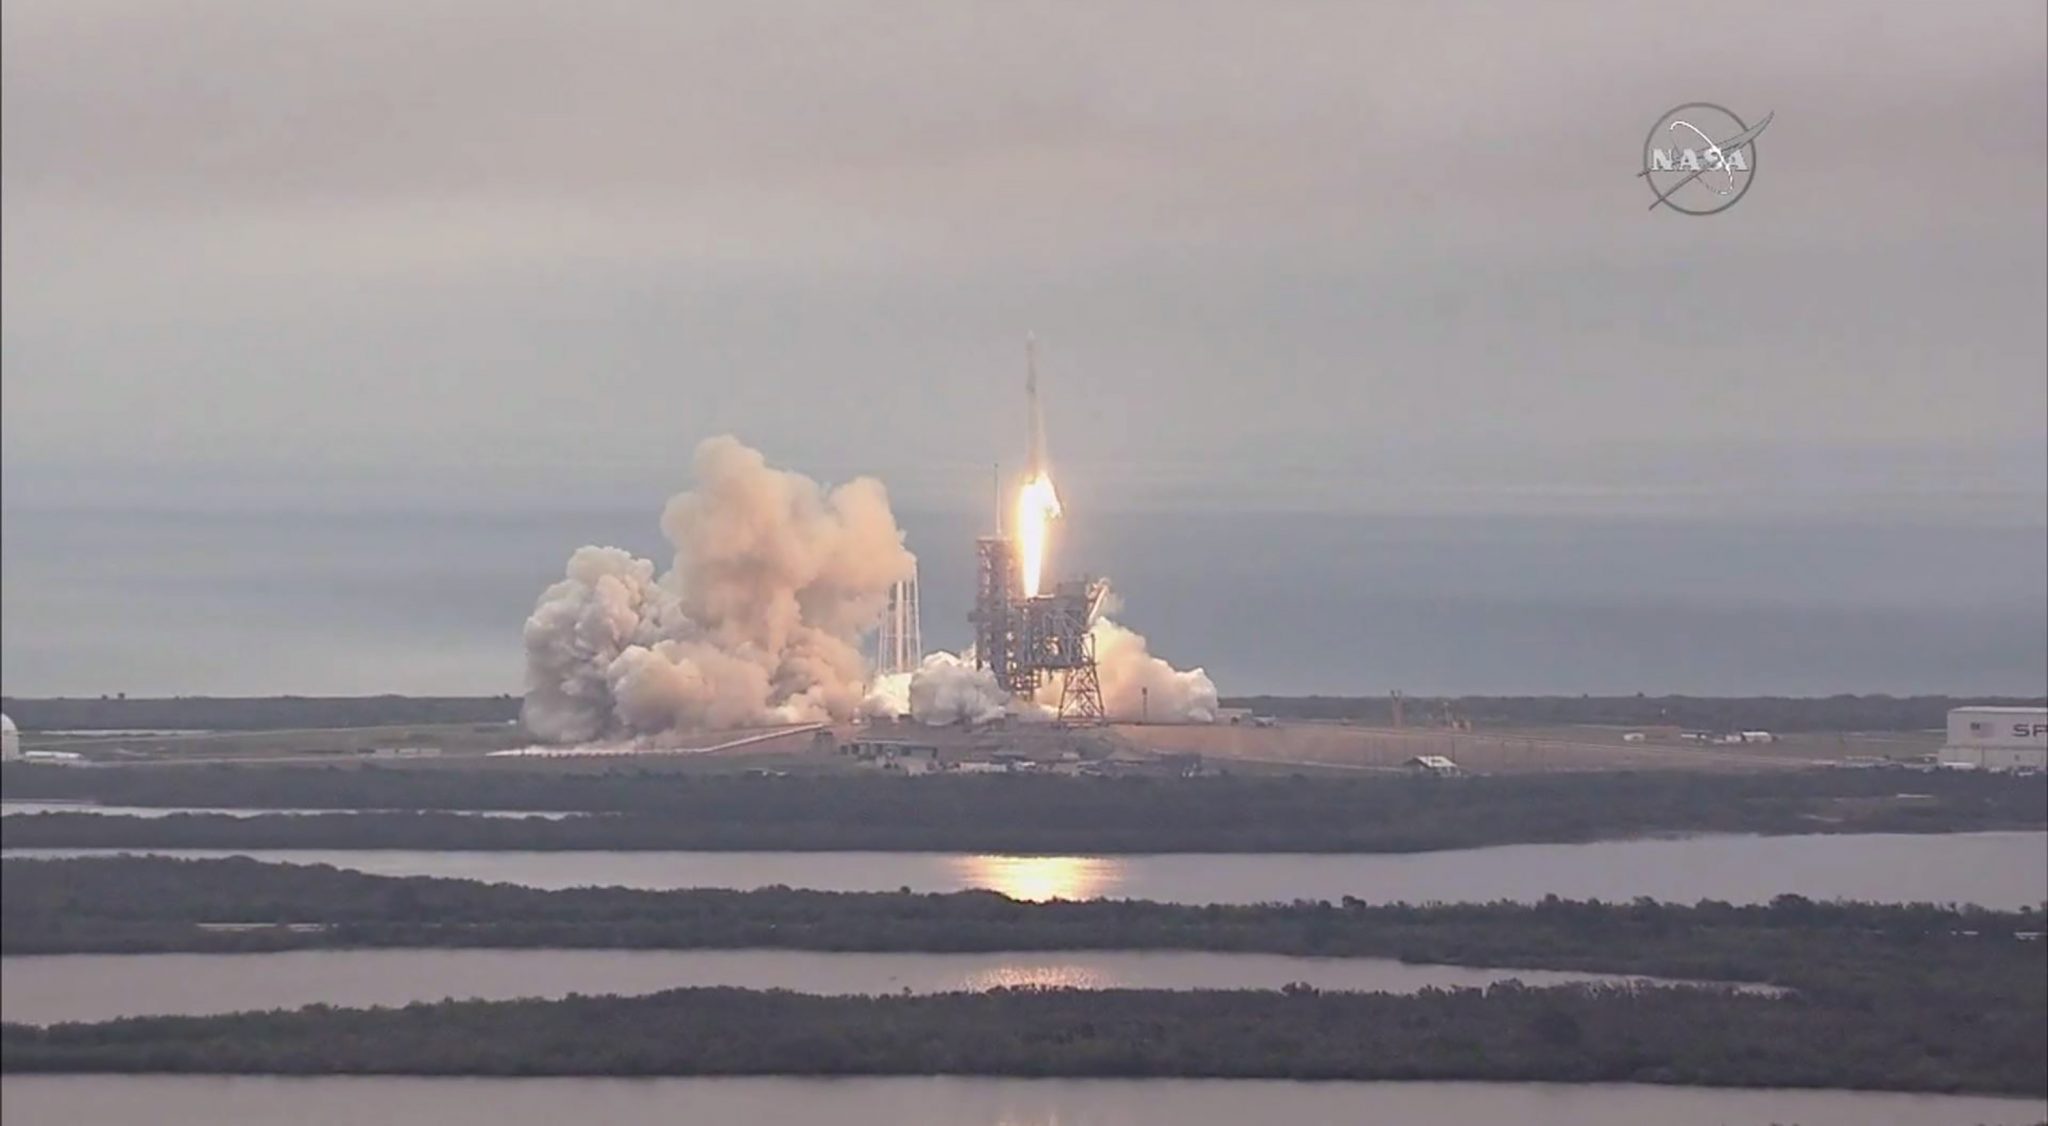 FILE PHOTO: This still image taken from NASA TV, shows the the SpaceX Falcon 9 rocket, carrying a Dragon cargo capsule, launching from the Kennedy Space Center Launch Complex 39A in Florida on February 19, 2017. The current resupply mission is the 10th of up to 20 planned trips to the International Space Station. The unmanned cargo capsule is packed with more than 5,000 pounds (2,267 kilograms) of food, gear and science experiments. Launchpad 39A was used for the Apollo and space shuttle launches. / AFP PHOTO / NASA / HO / RESTRICTED TO EDITORIAL USE - MANDATORY CREDIT "AFP PHOTO / NASA" - NO MARKETING NO ADVERTISING CAMPAIGNS - DISTRIBUTED AS A SERVICE TO CLIENTS